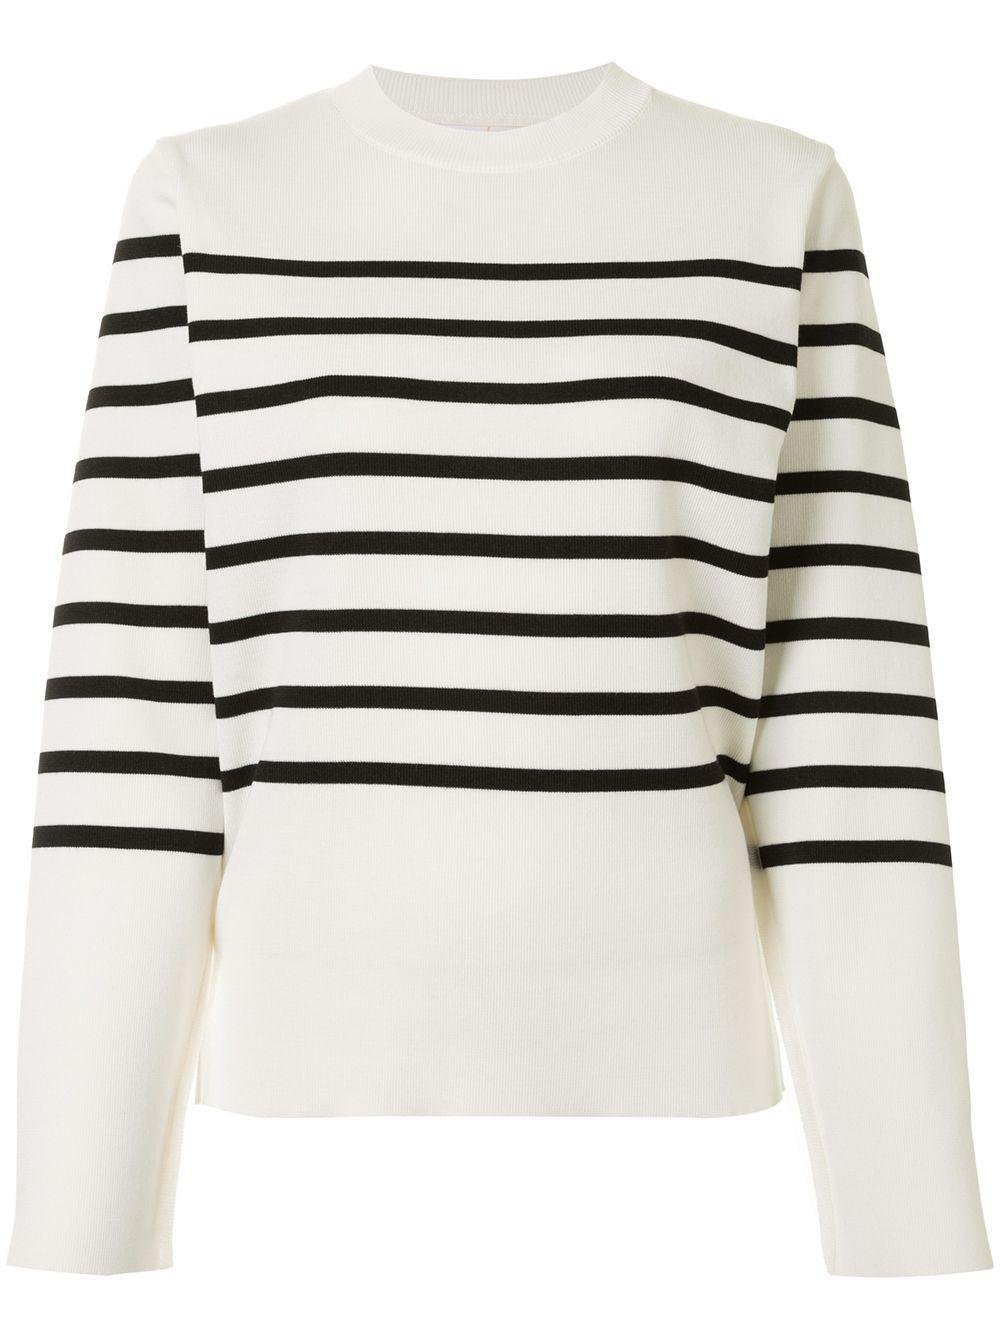 cut-out striped pullover by AKIRA NAKA